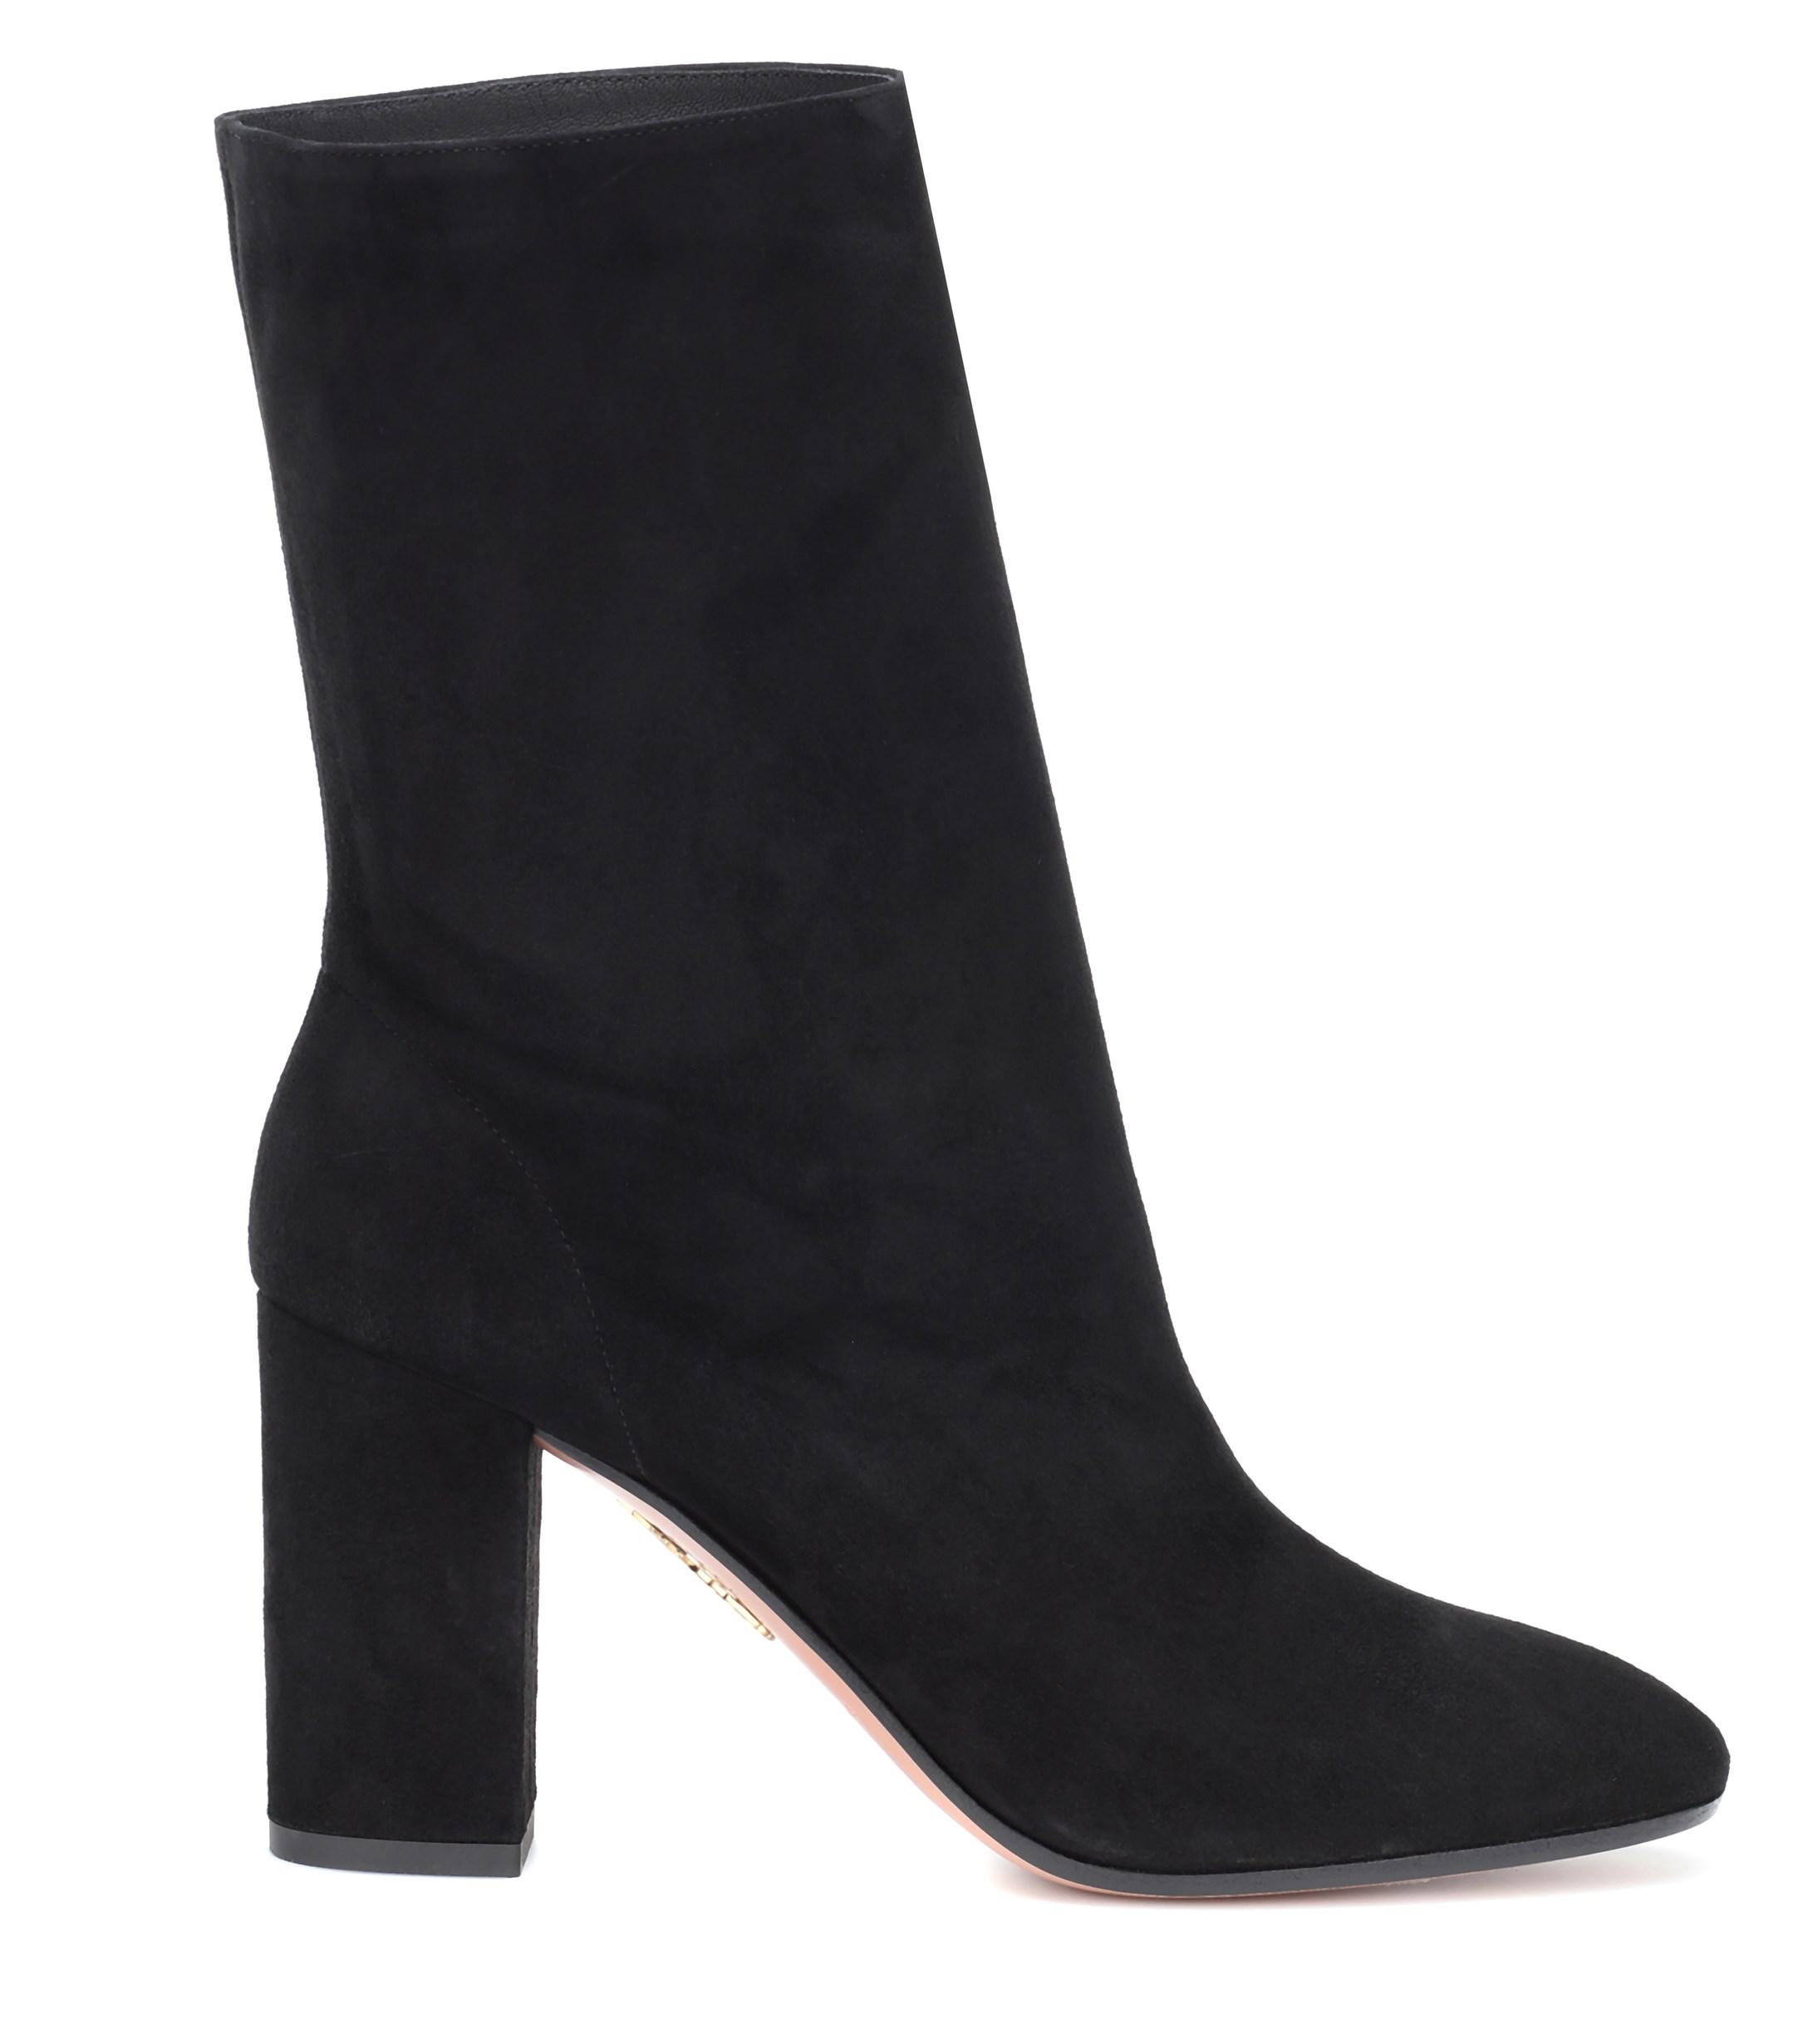 Aquazzura Boogie 85 Suede Ankle Boots in Black - Lyst